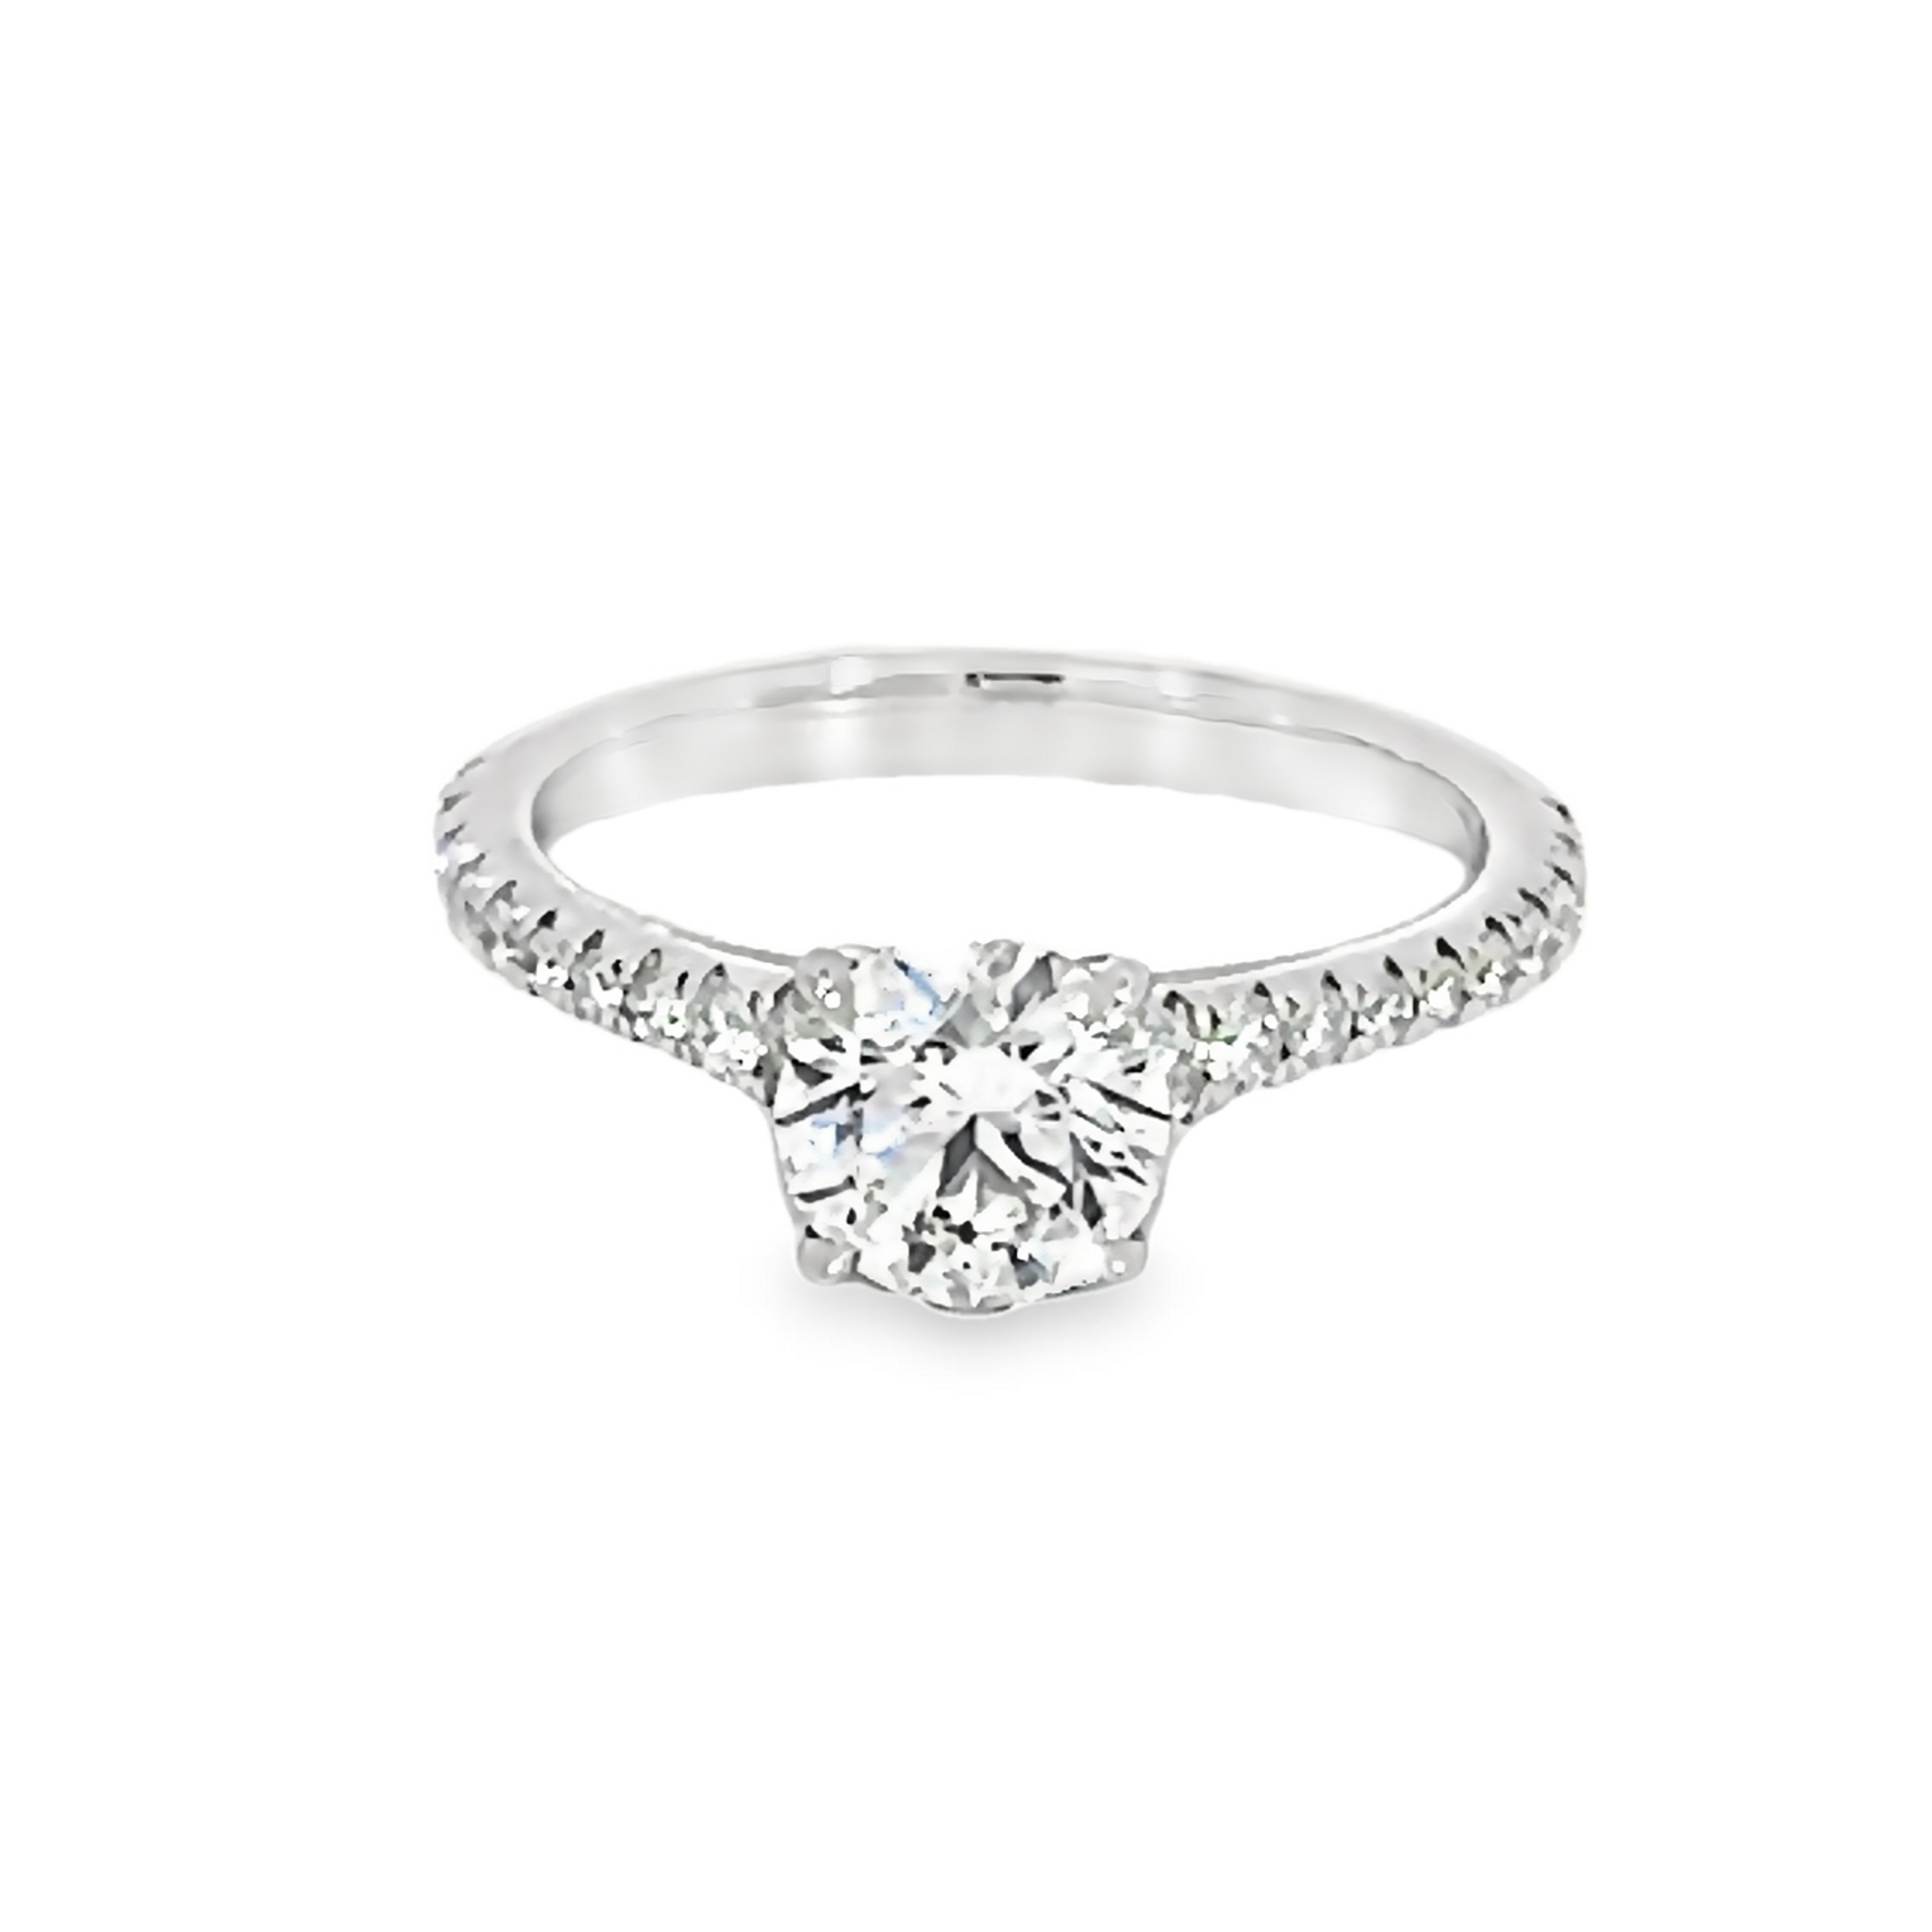 Round Brilliant Diamond Engagement Ring With Accent Stones